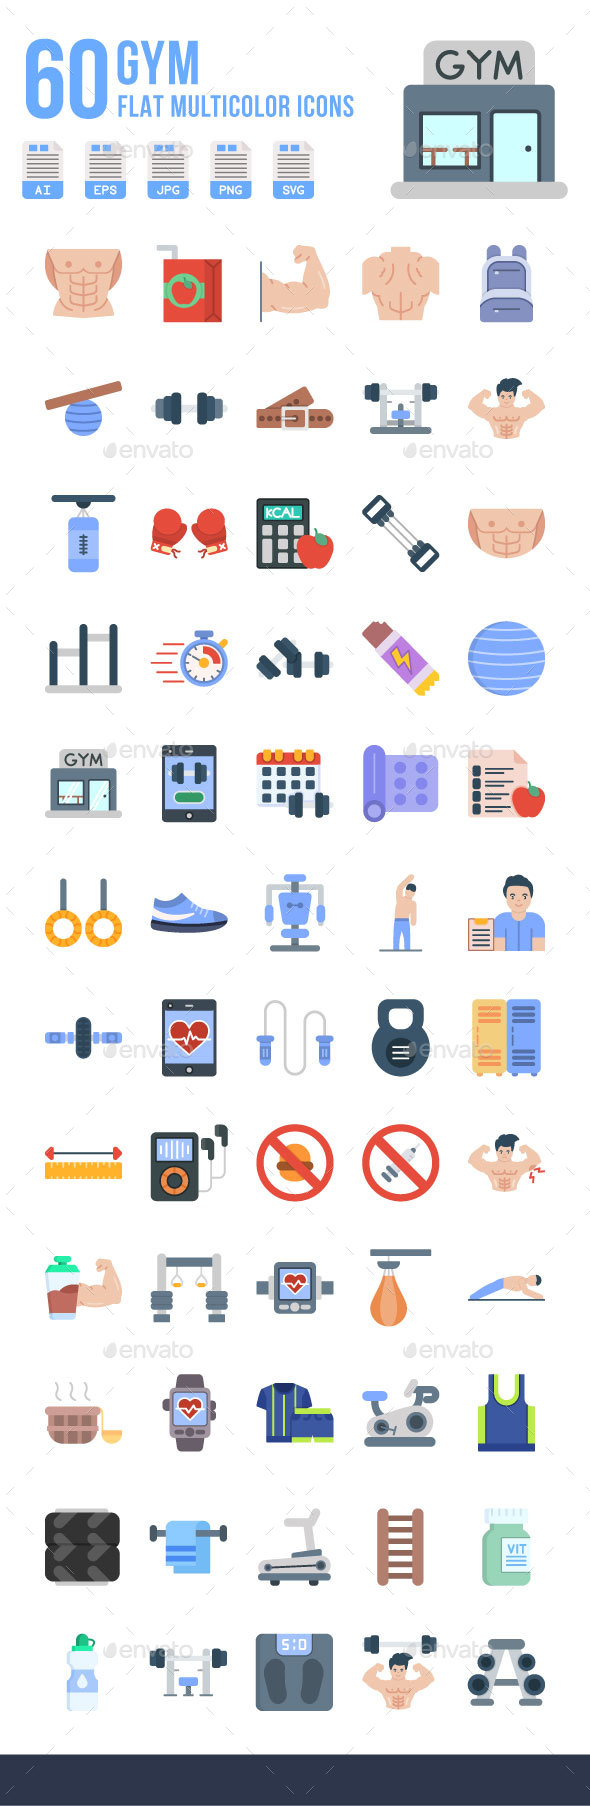 [DOWNLOAD]Gym Flat Icons